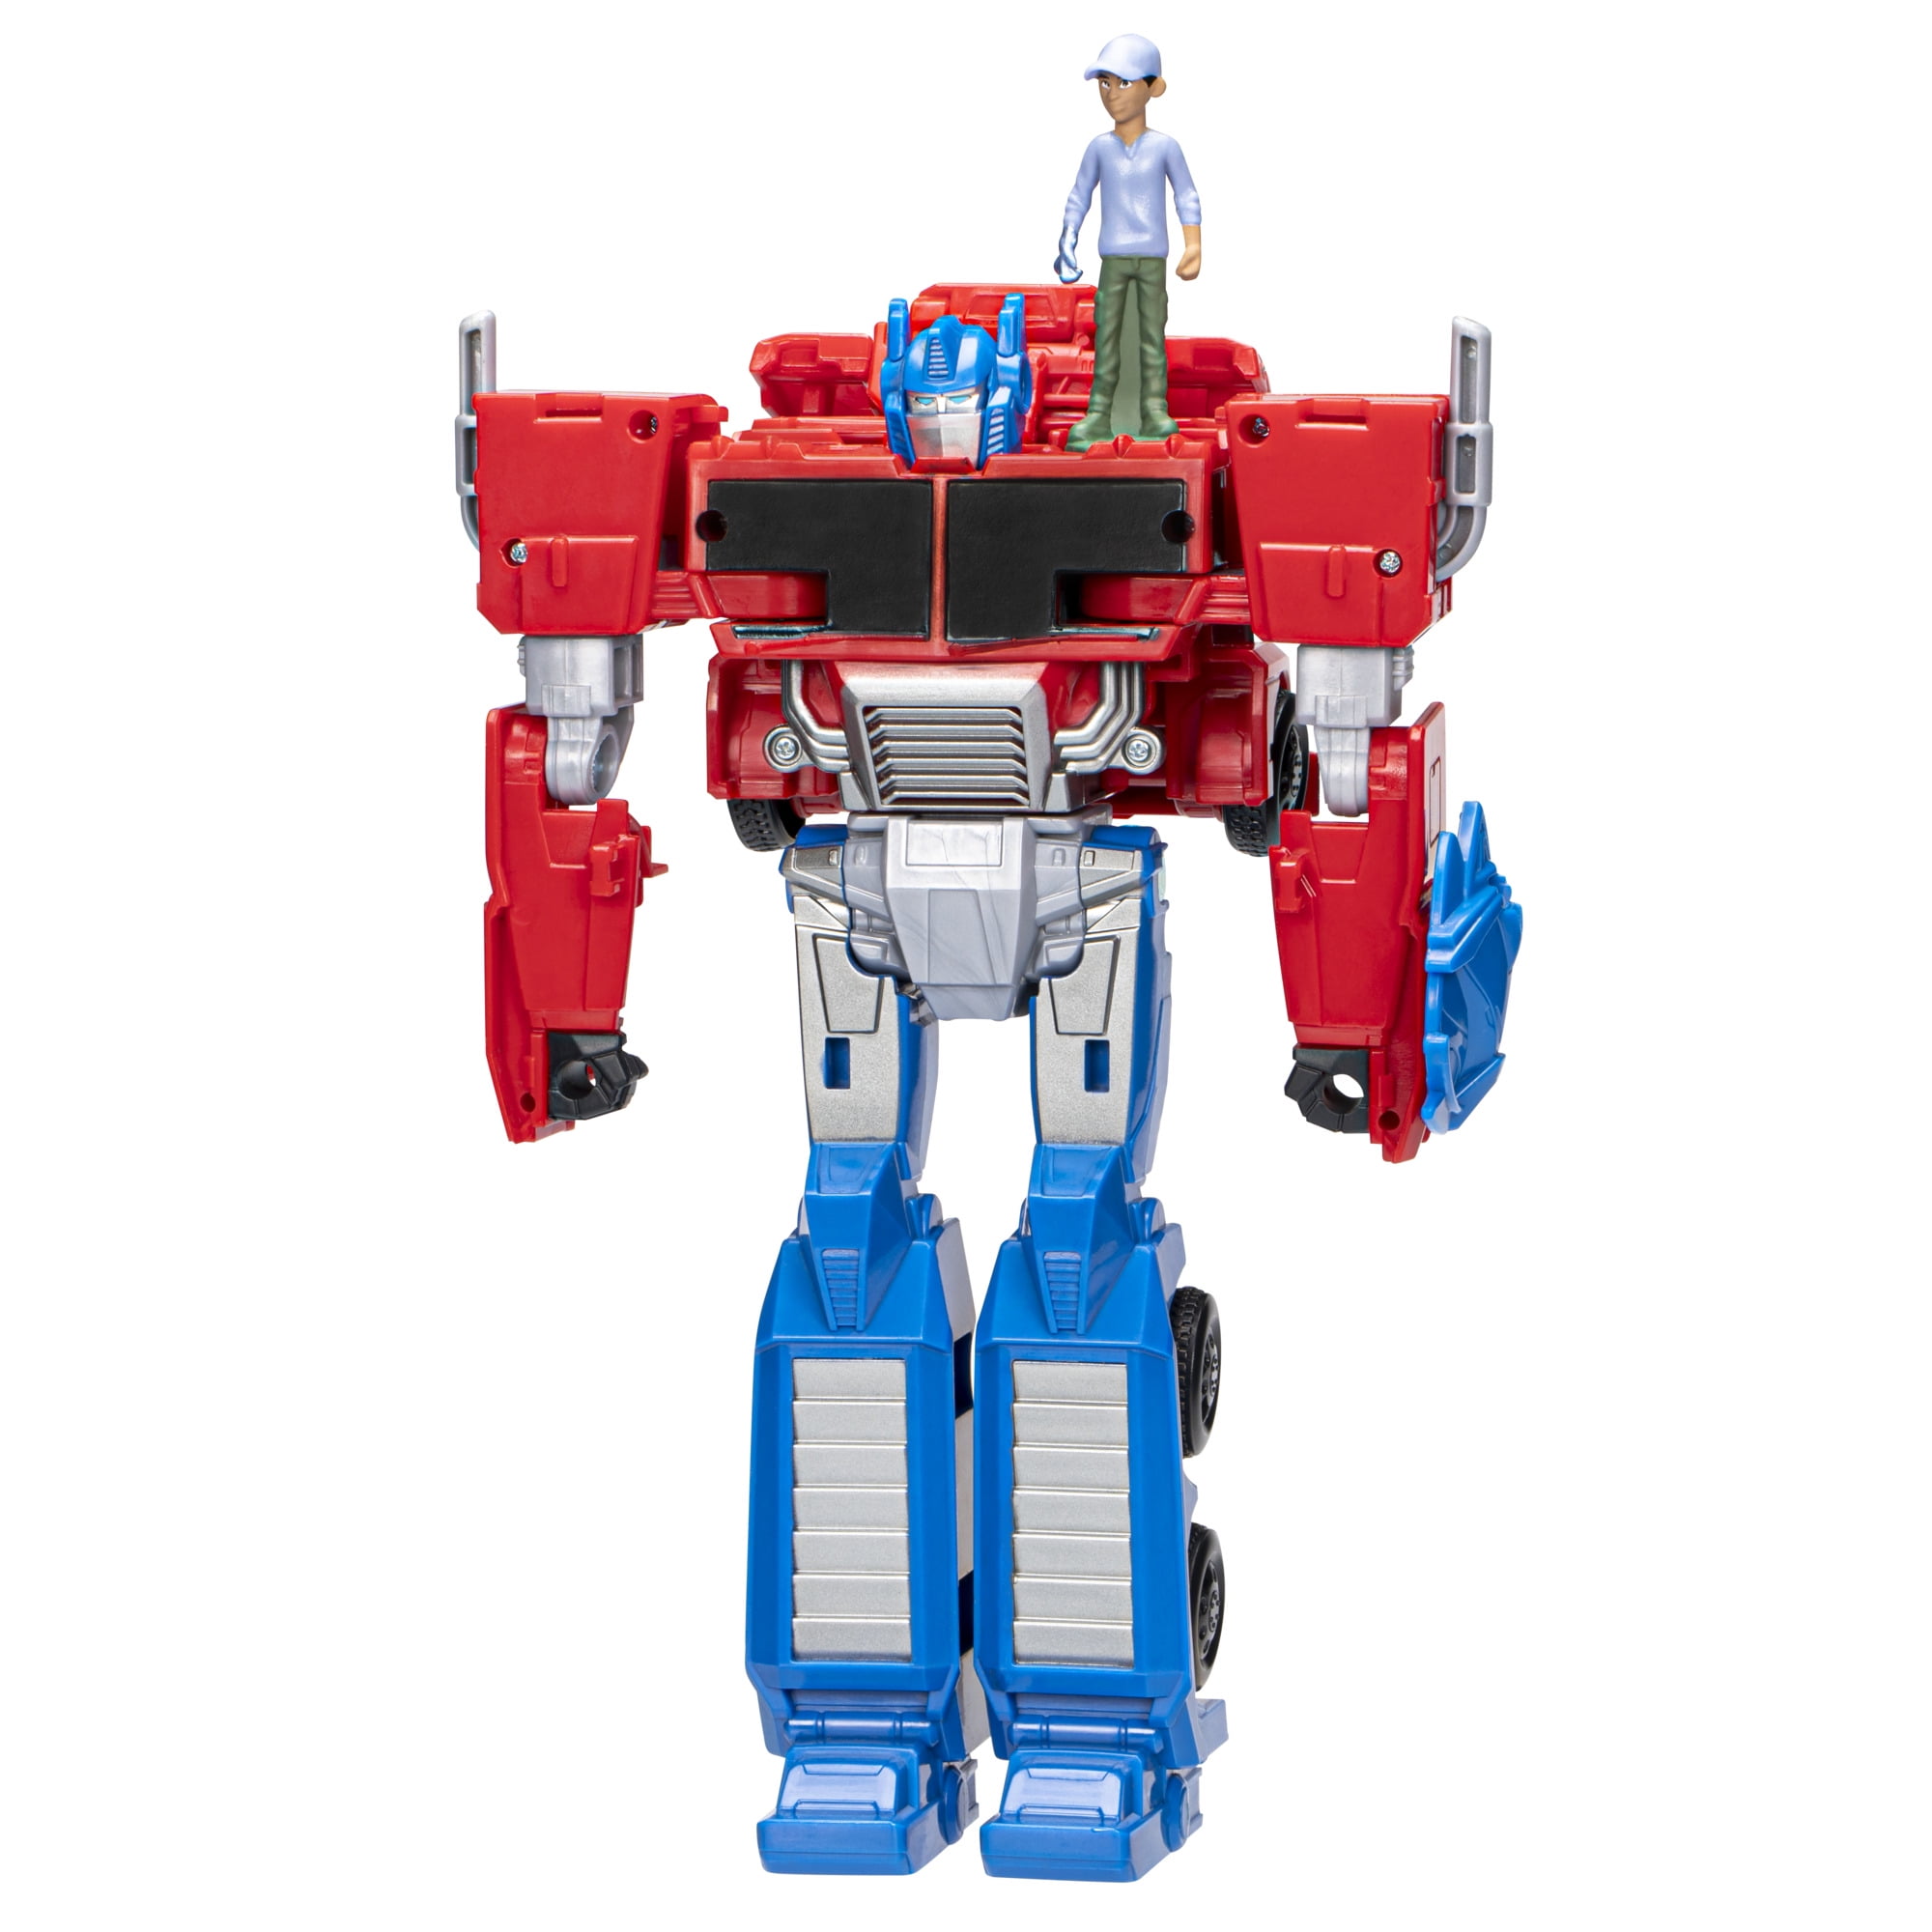 Transformers Earthspark Spin Changer Optimus Prime Action Figure with Robby, Great Easter Gifts